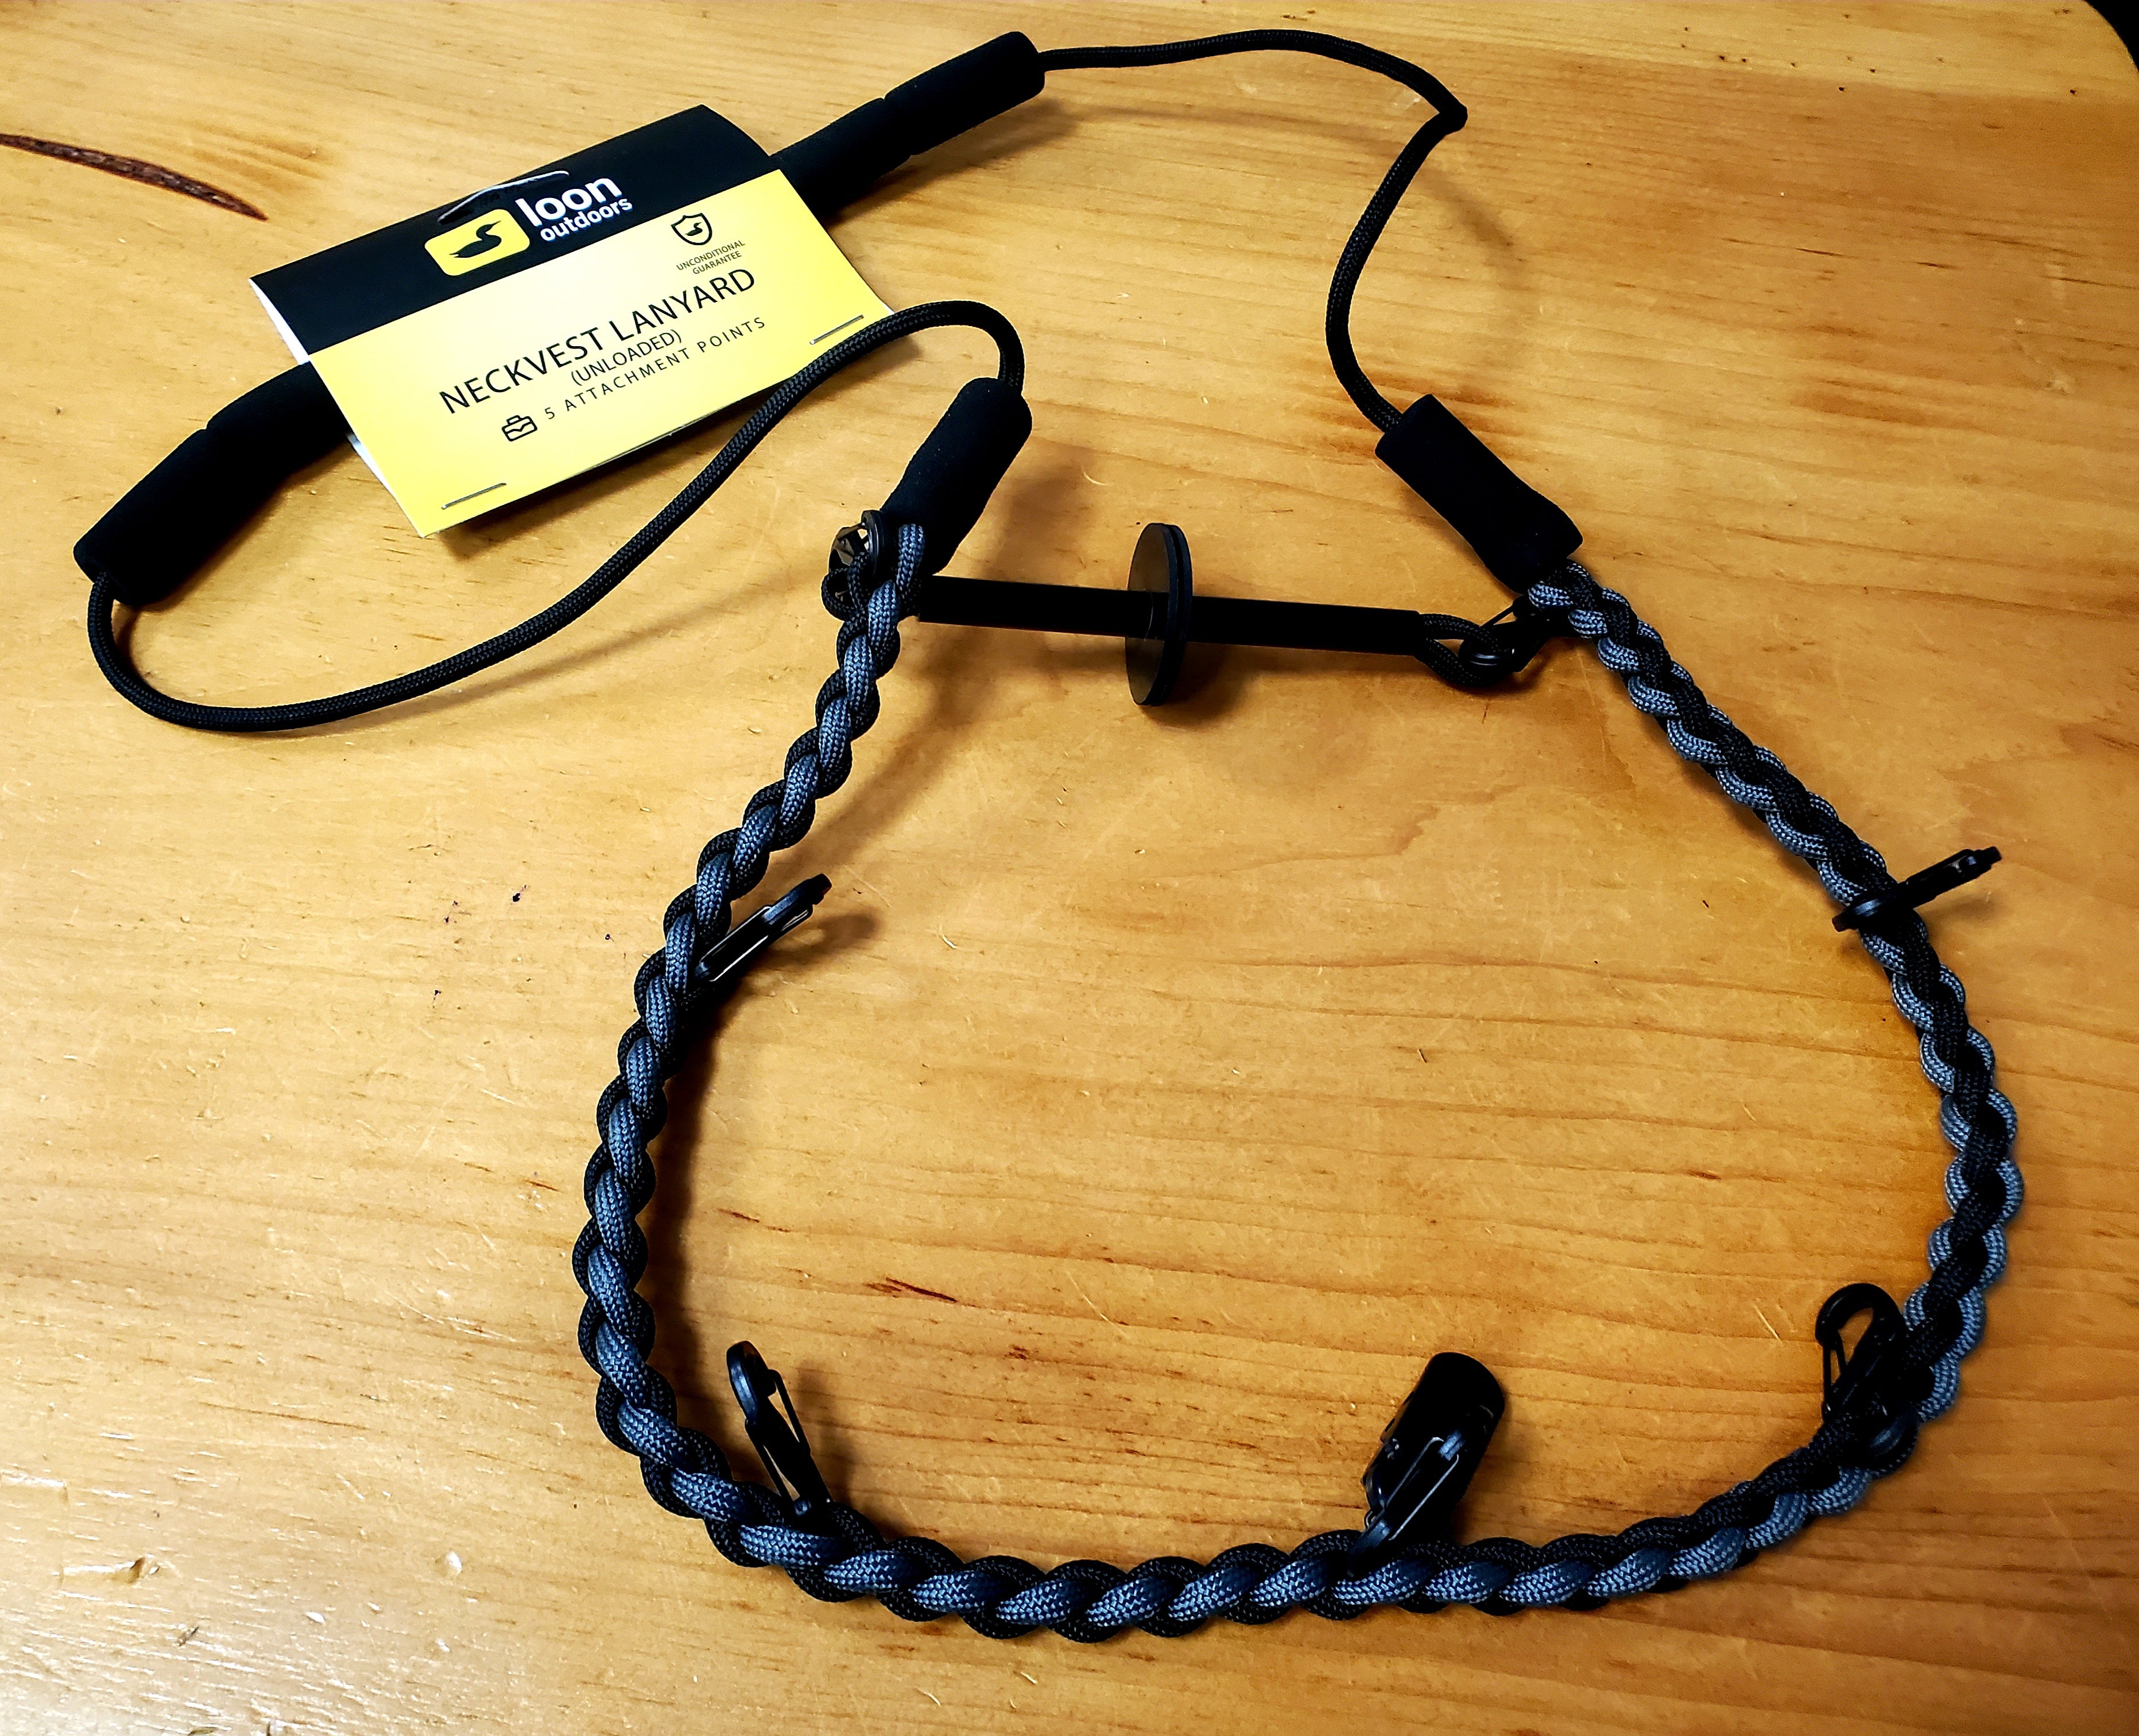 Loon Outdoors Neckvest Lanyard - Loaded